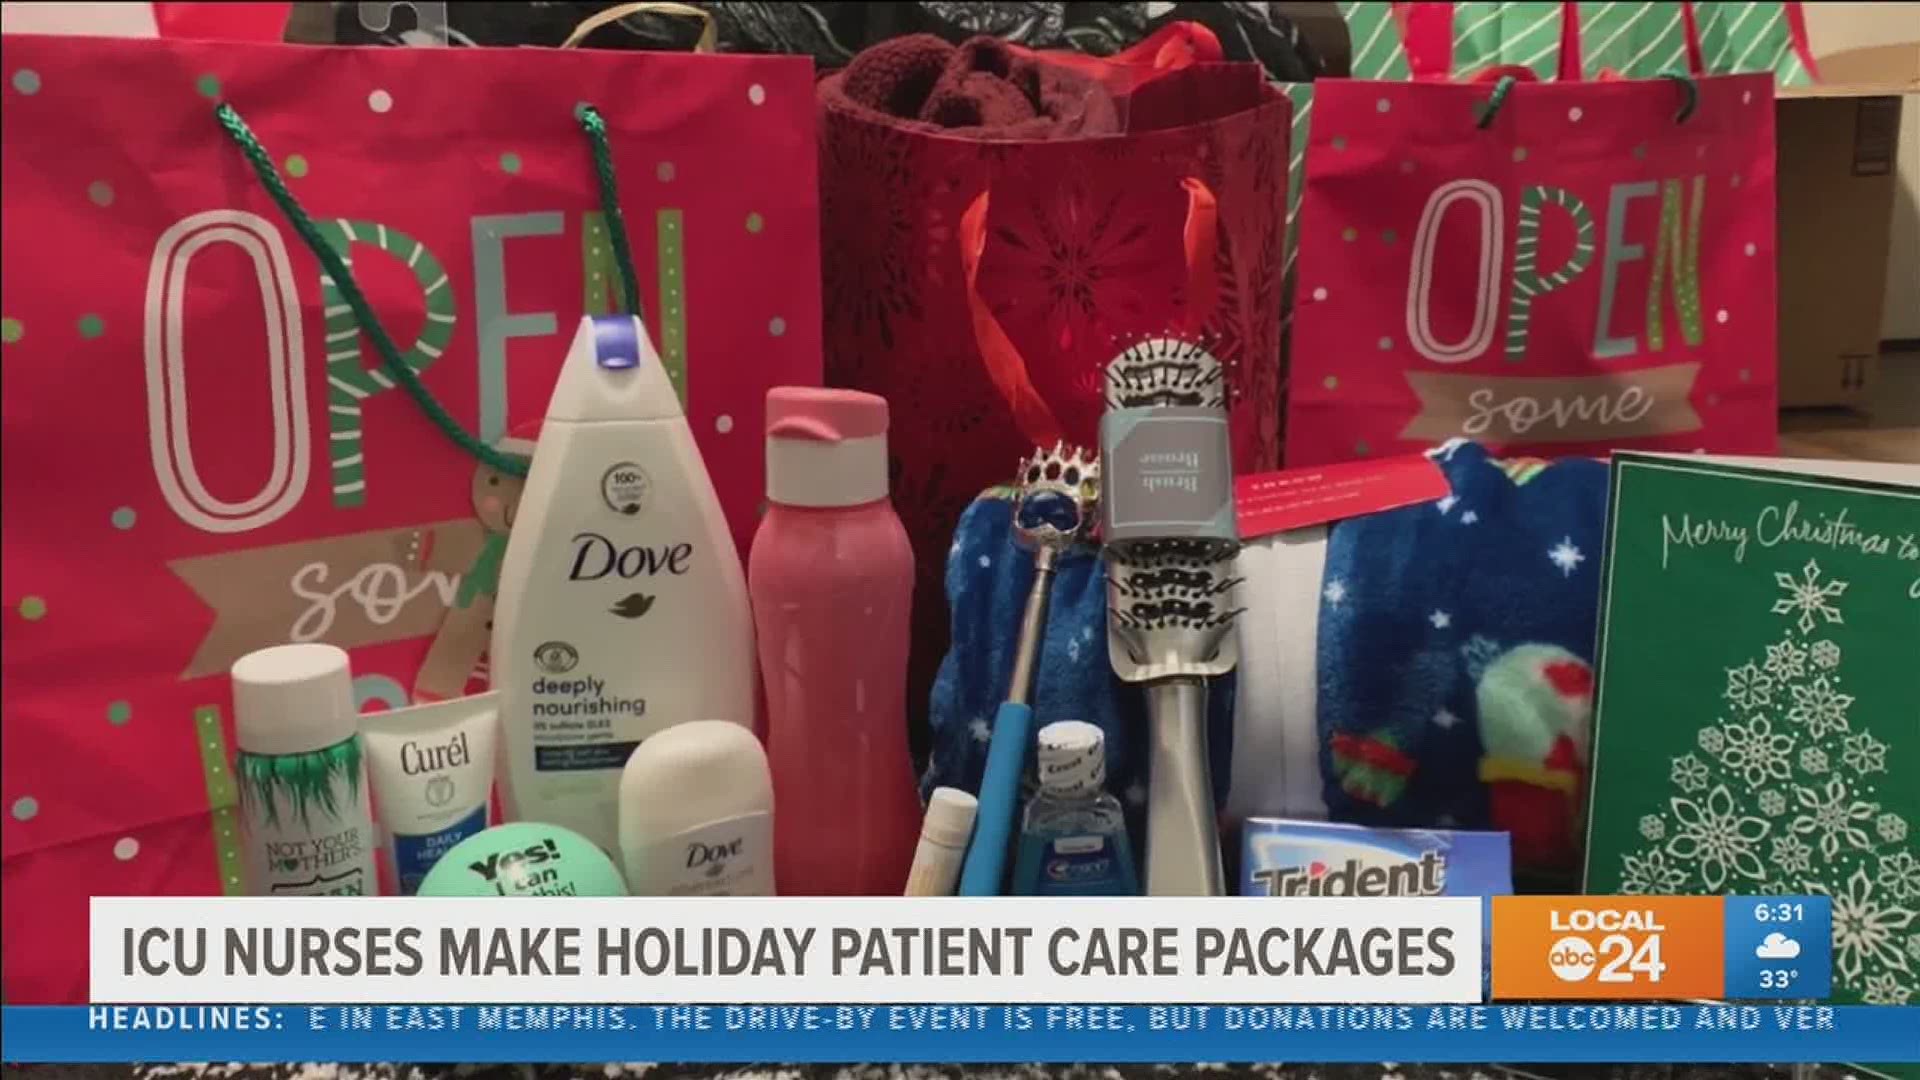 Nurses at Baptist-Memorial are ensuring ICU patients feel the love while being in the hospital during the holidays